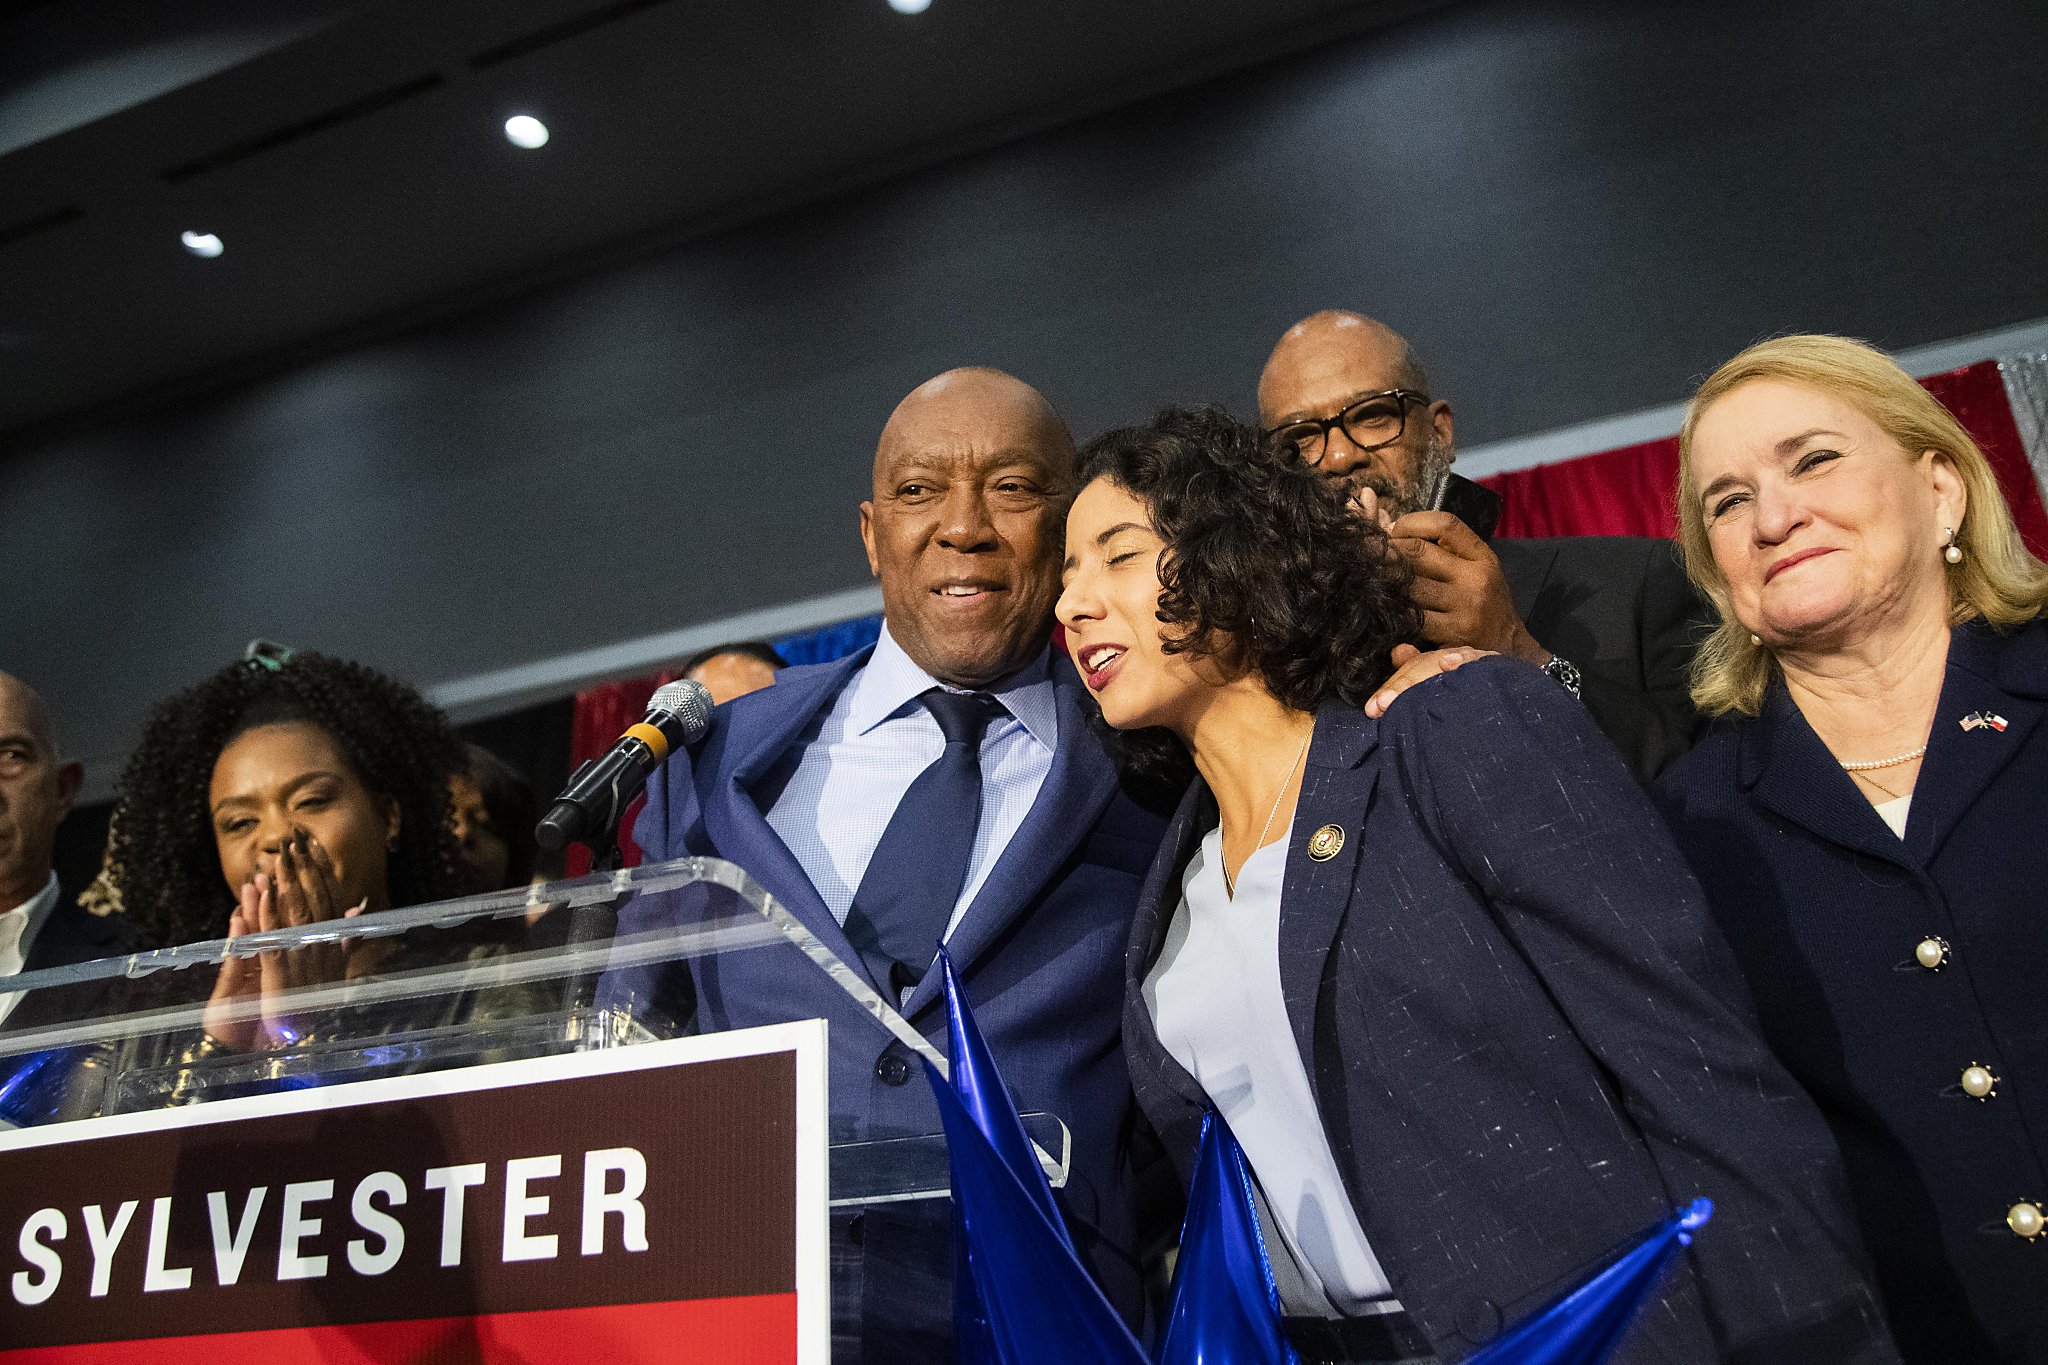 Houston Mayor Sylvester Turner wins reelection in runoff